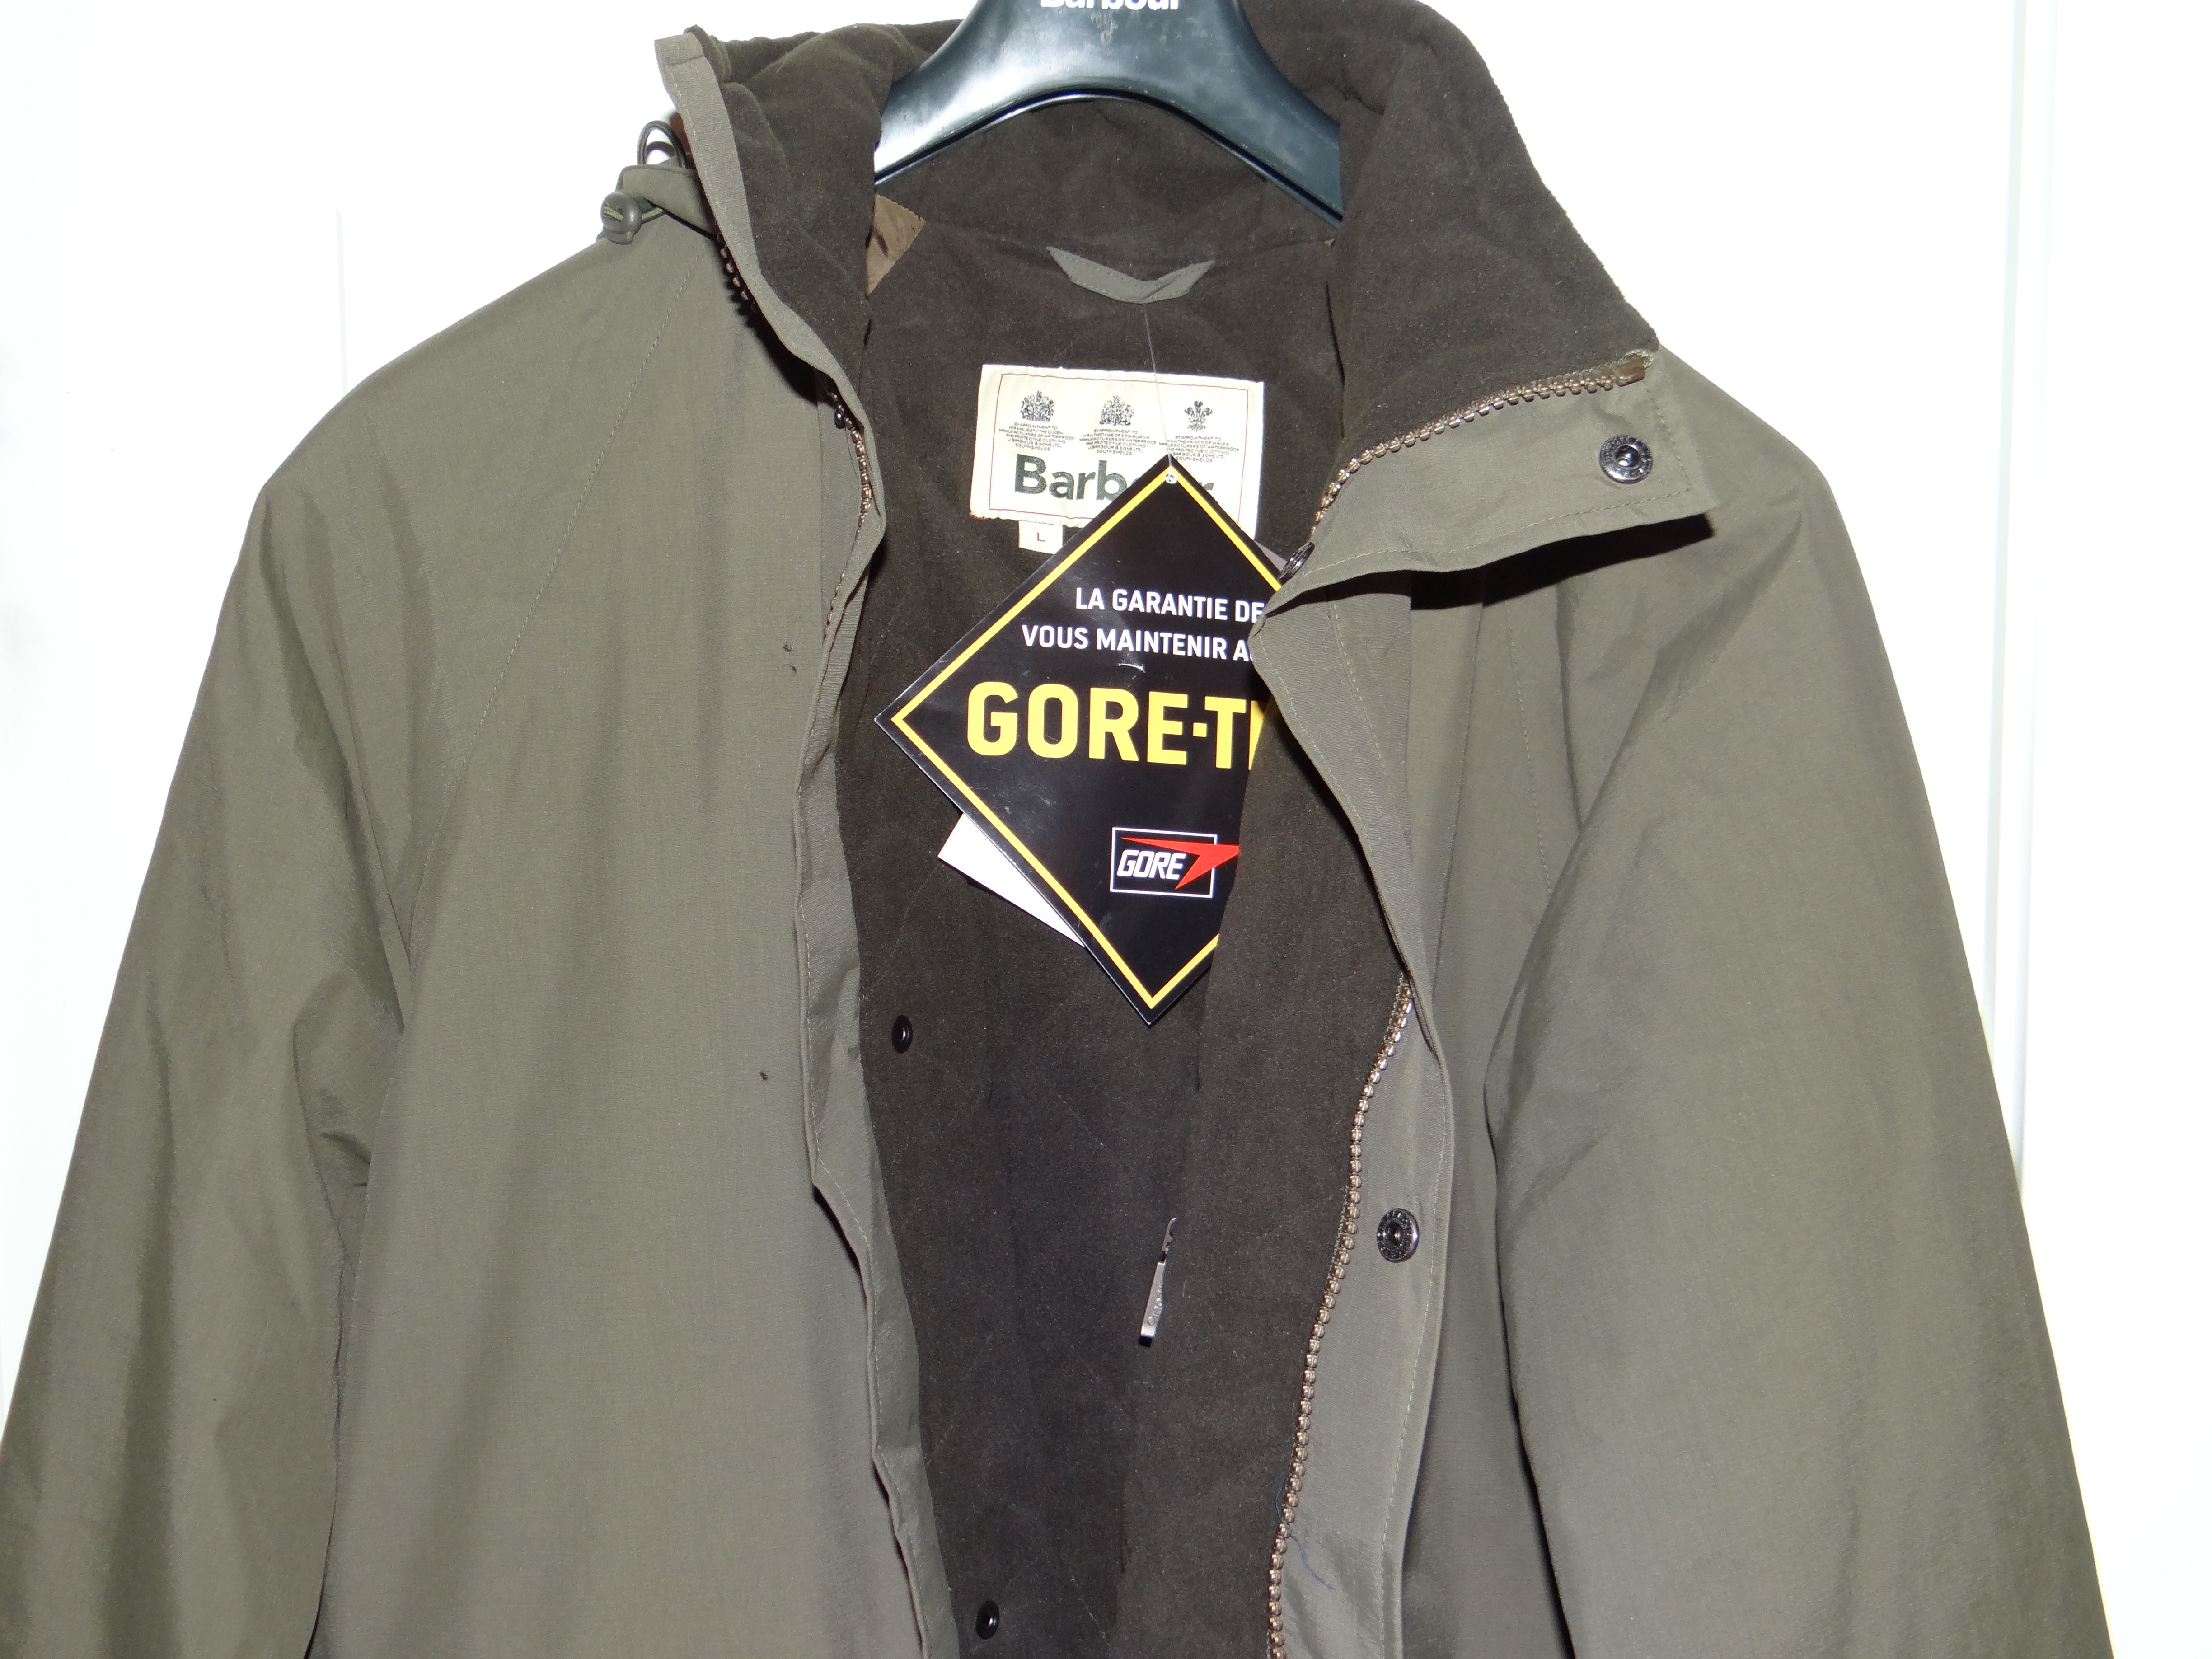 NWT Barbour Gore-Tex Featherweight Climate Sporting Jacket Large |  Styleforum